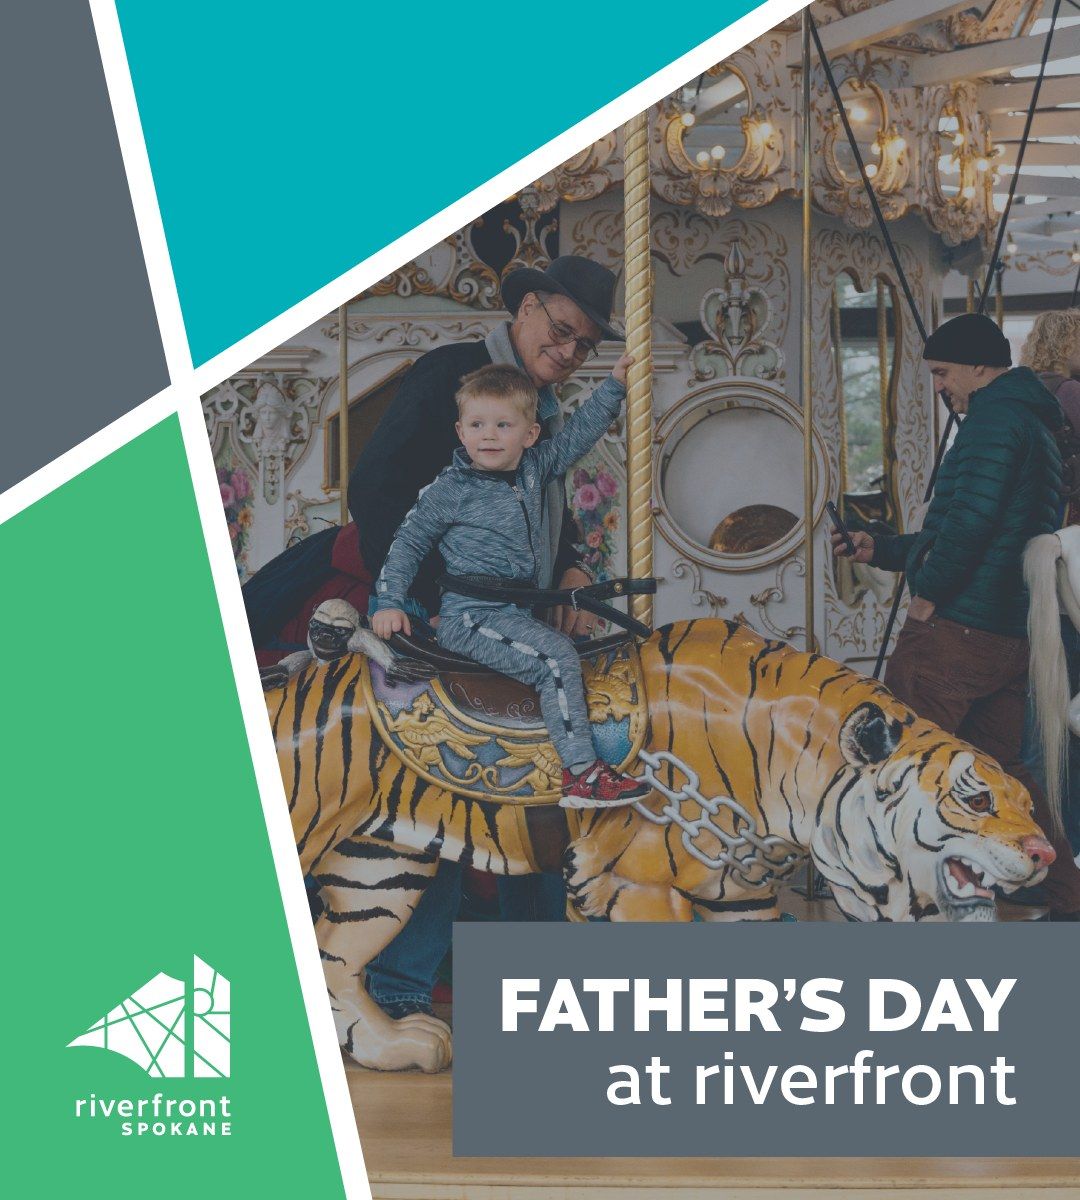 Father's Day Special at Riverfront Park